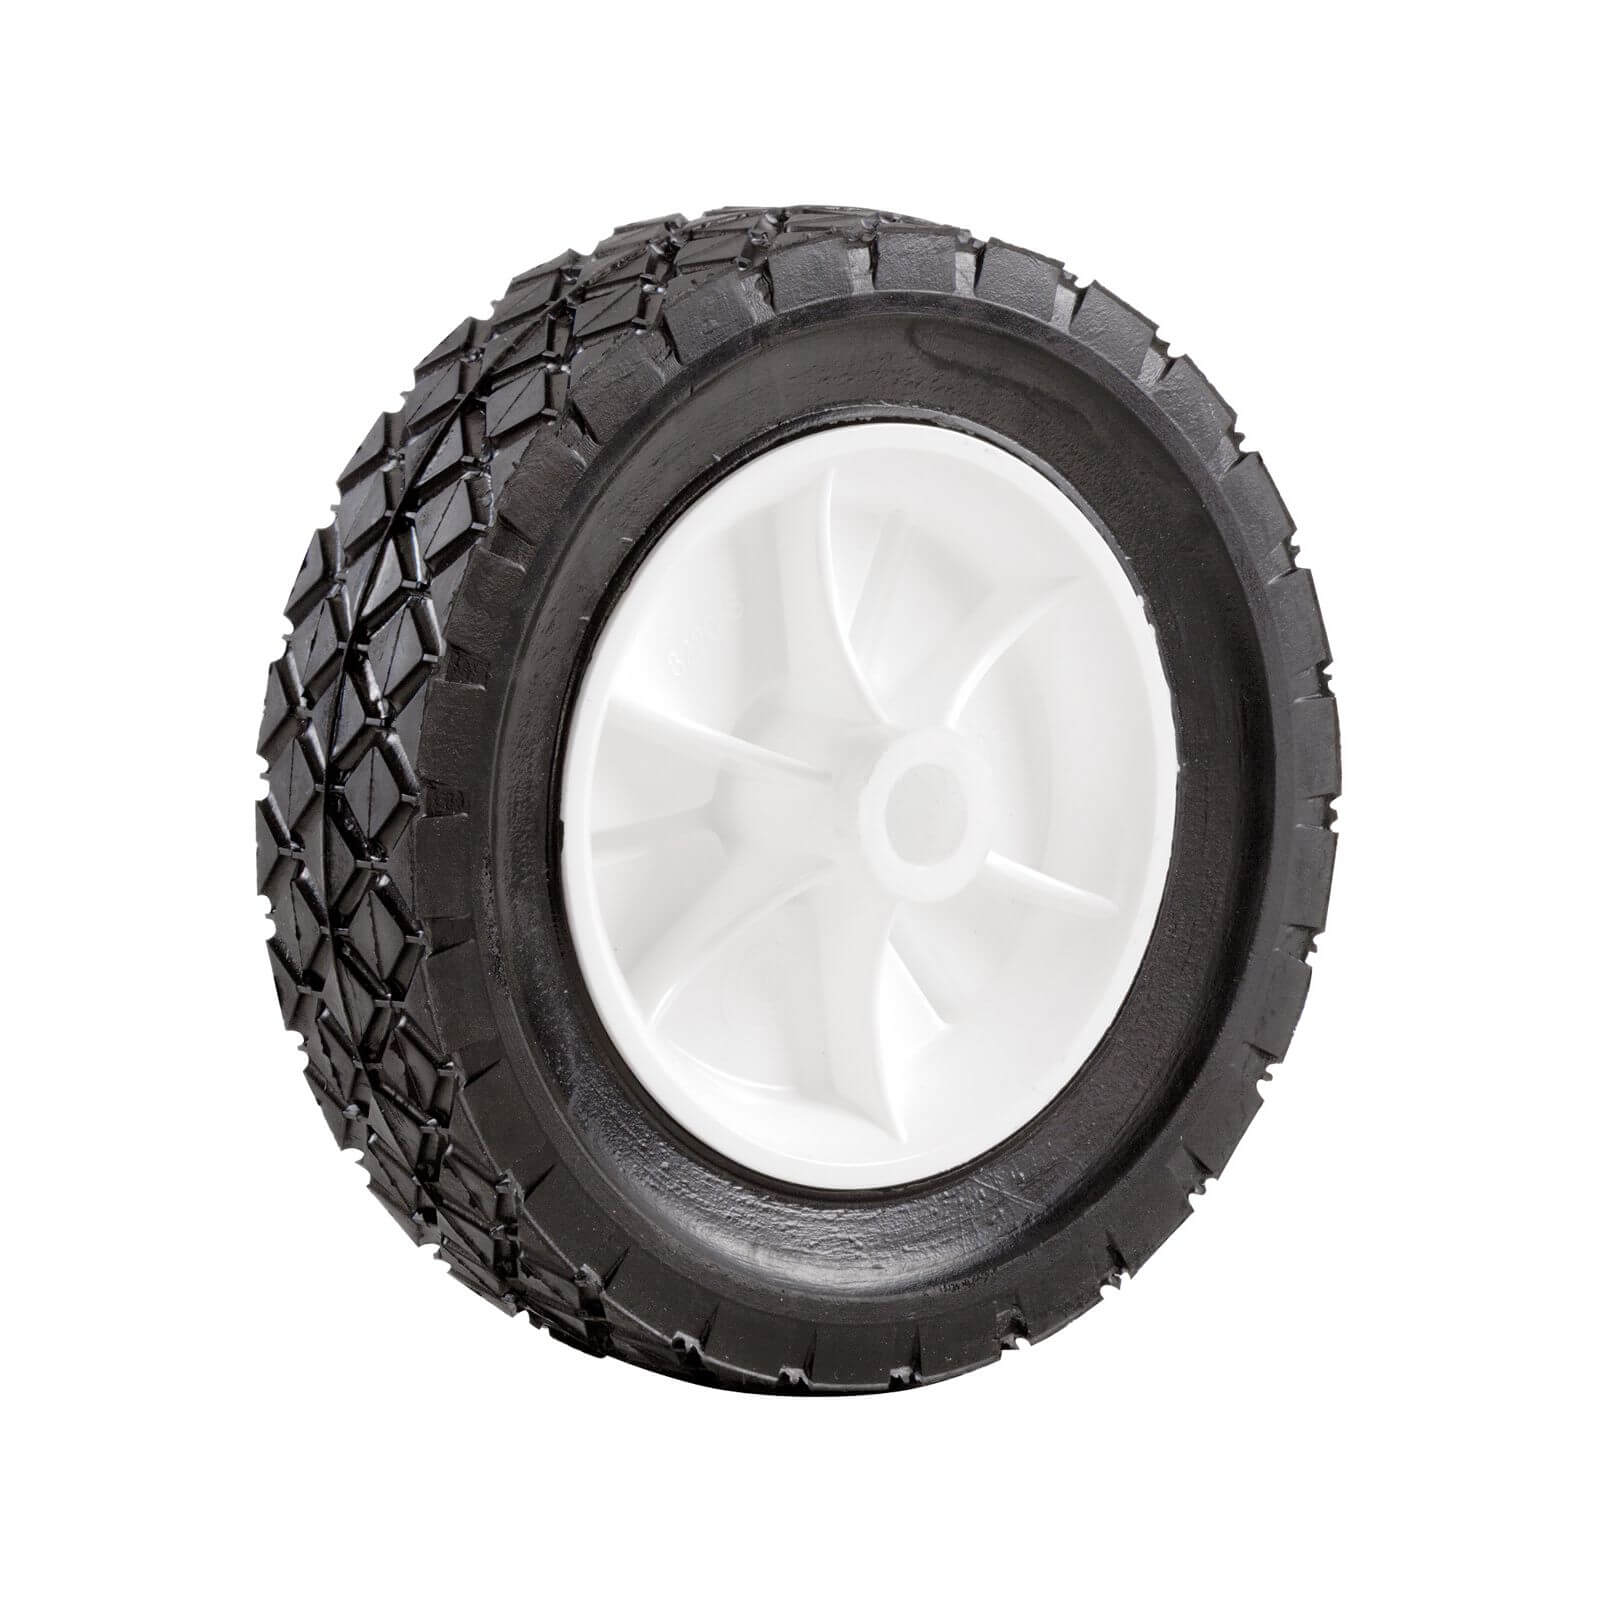 Photo of Wheel - 178mm - 1 Pack